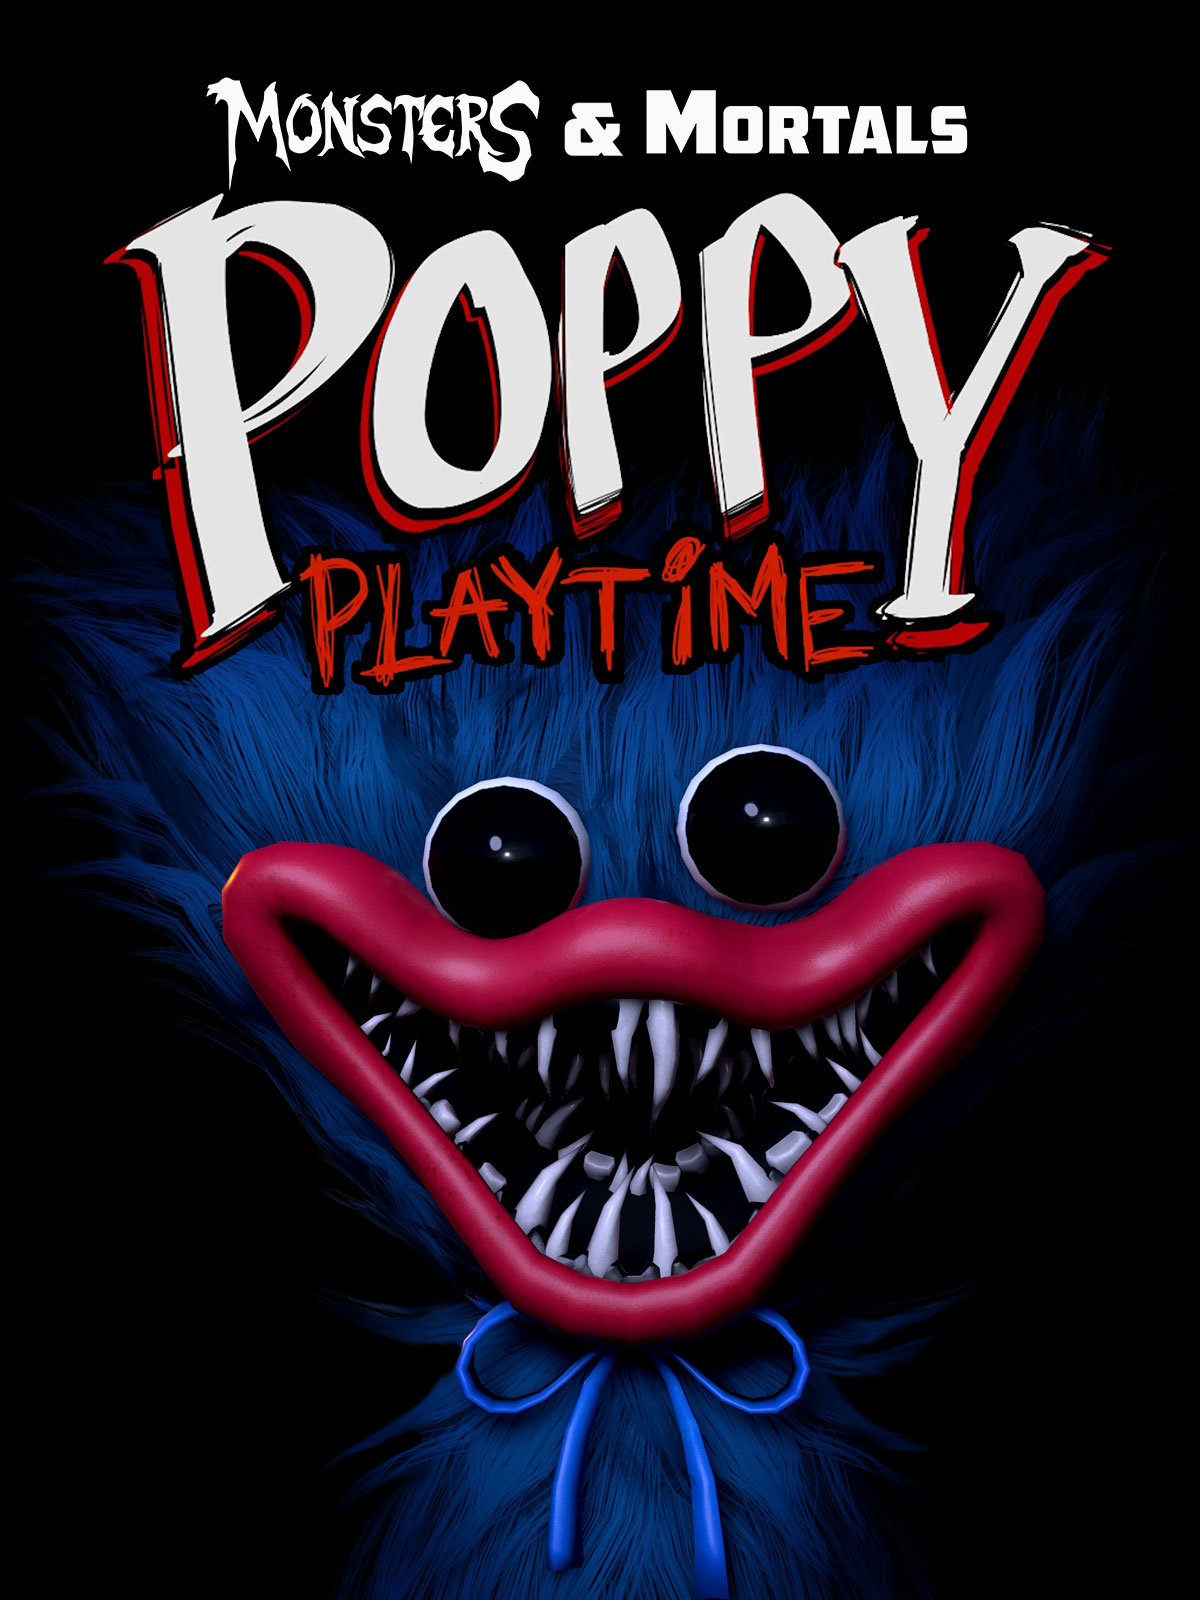 The Monster Within: A Poppy Playtime Theory : r/GameTheorists